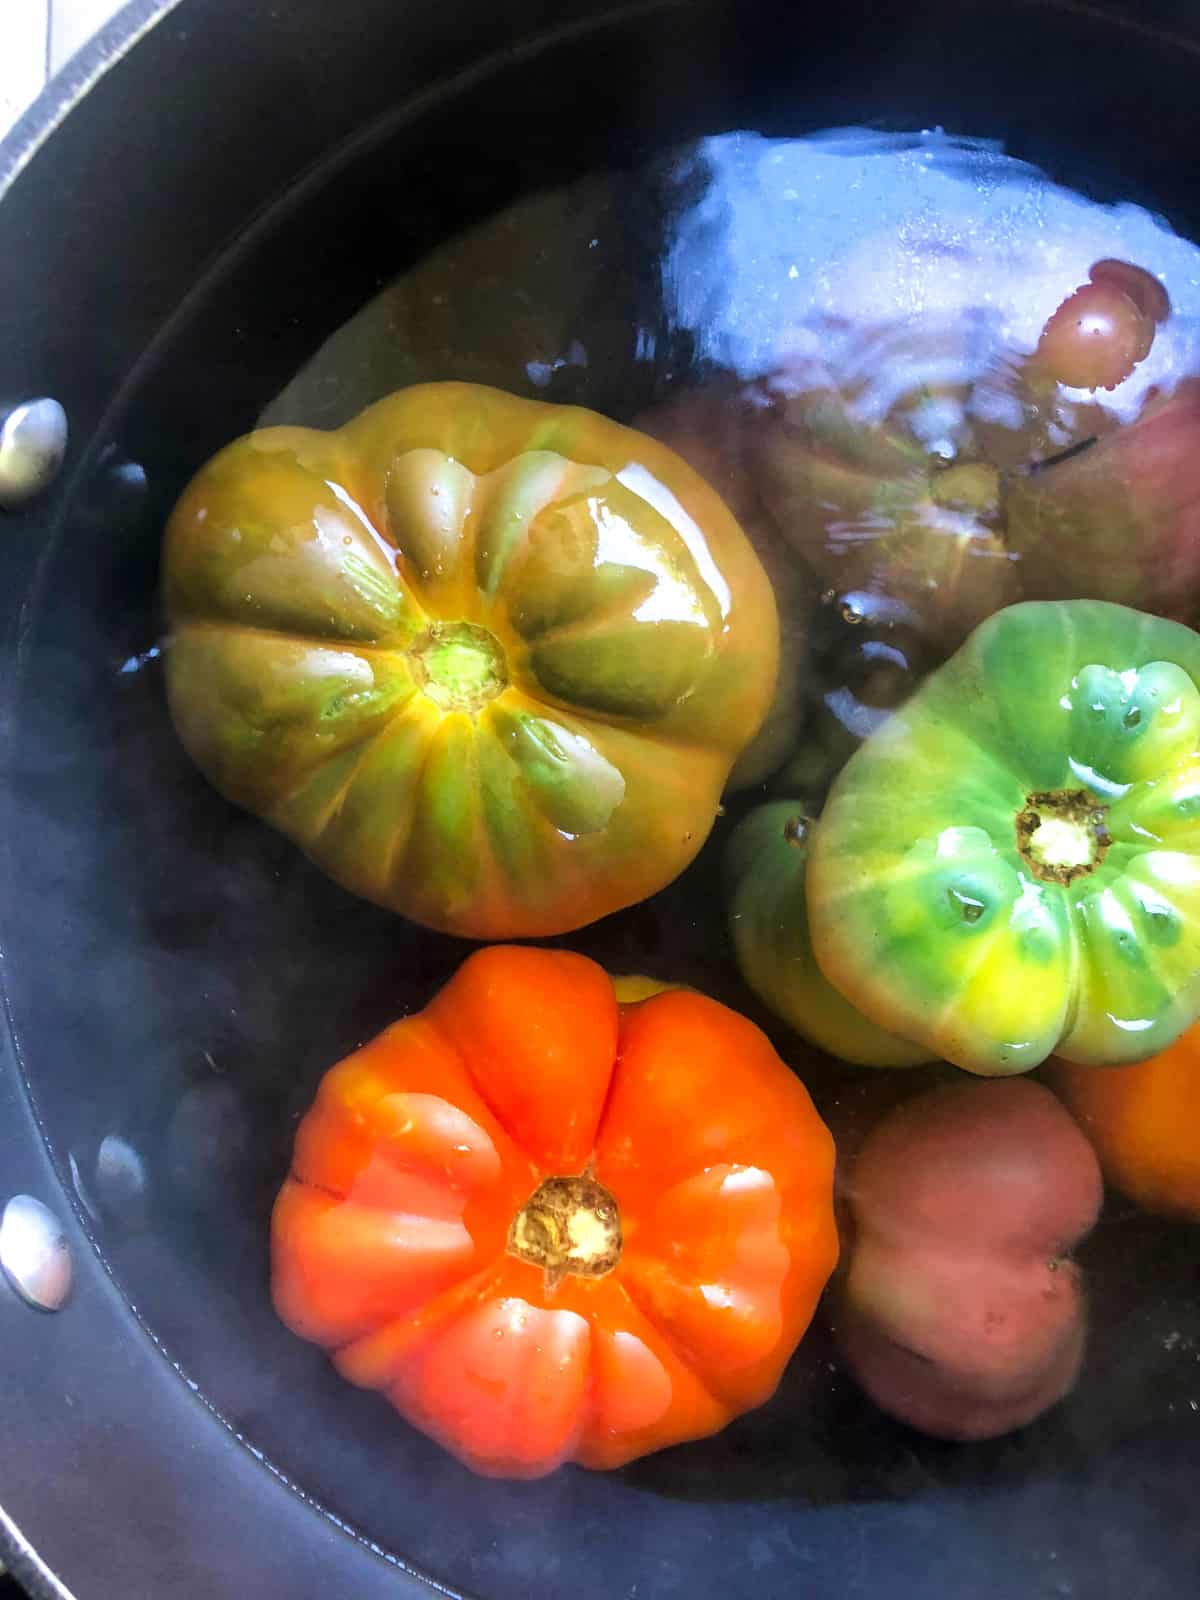 Place the tomatoes in a bath of boiling water for about a minute.